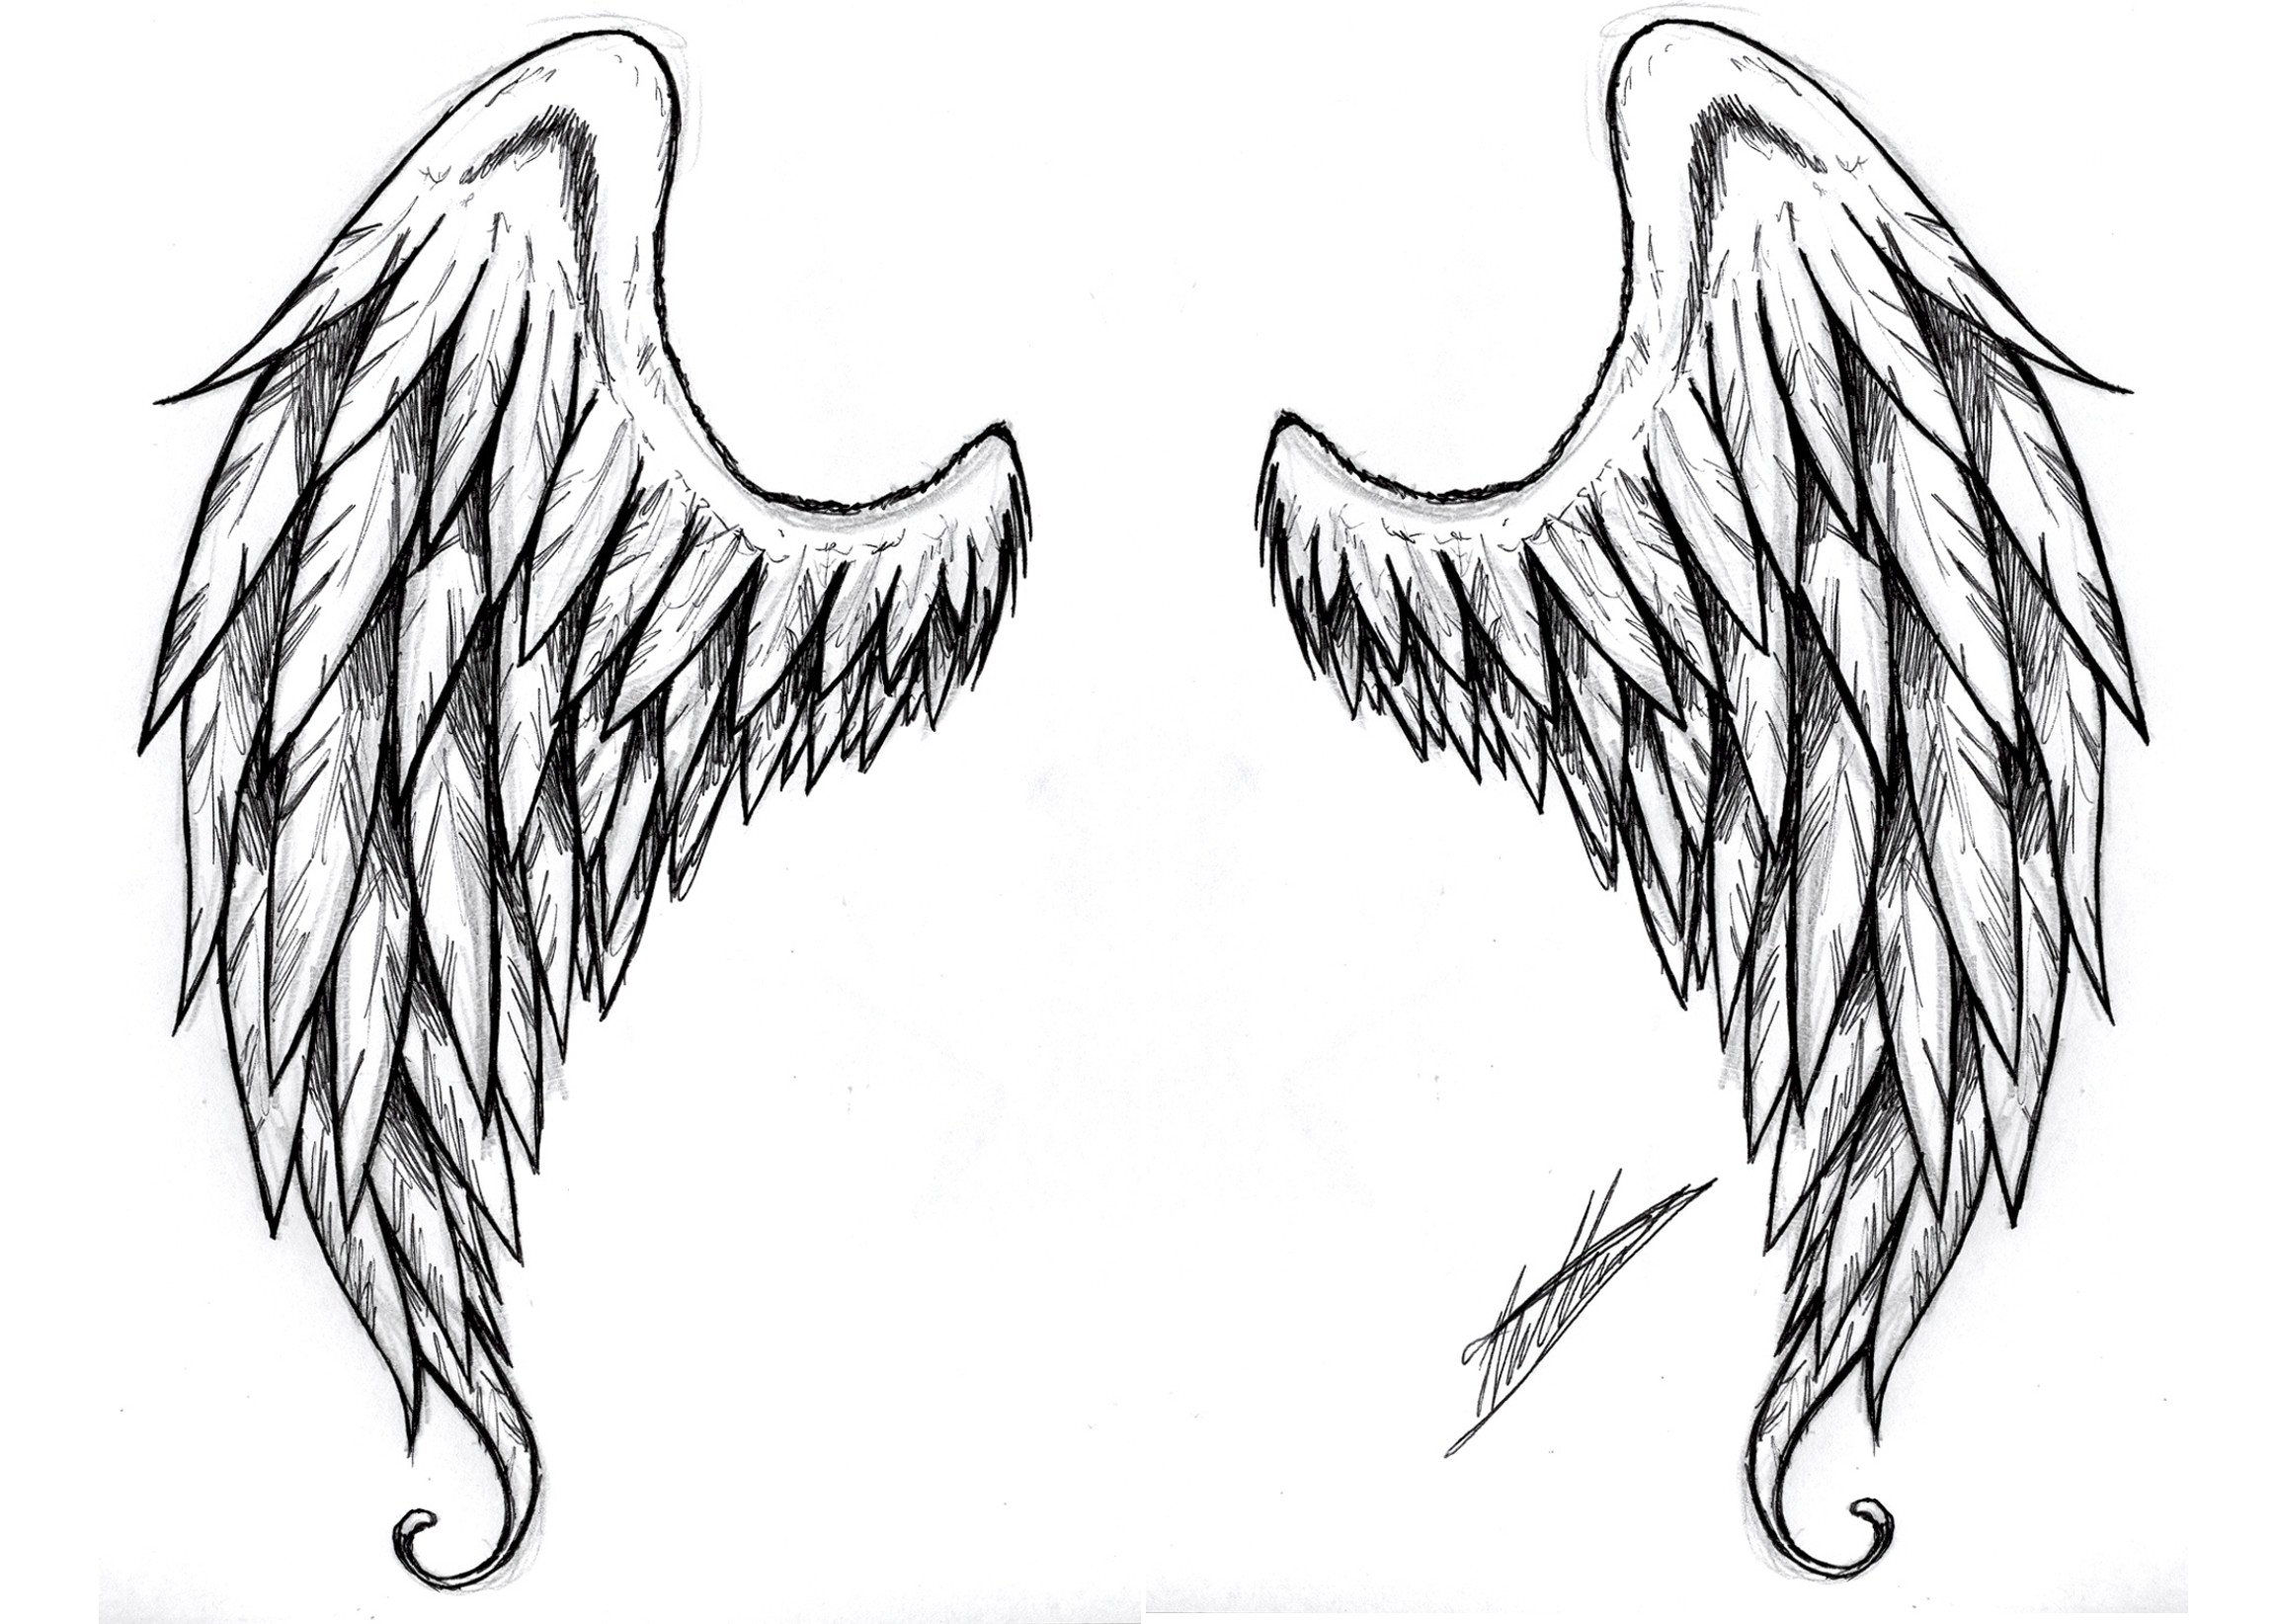 2304x1644 Images For Black And White Cross With Wings Tattoo Designs